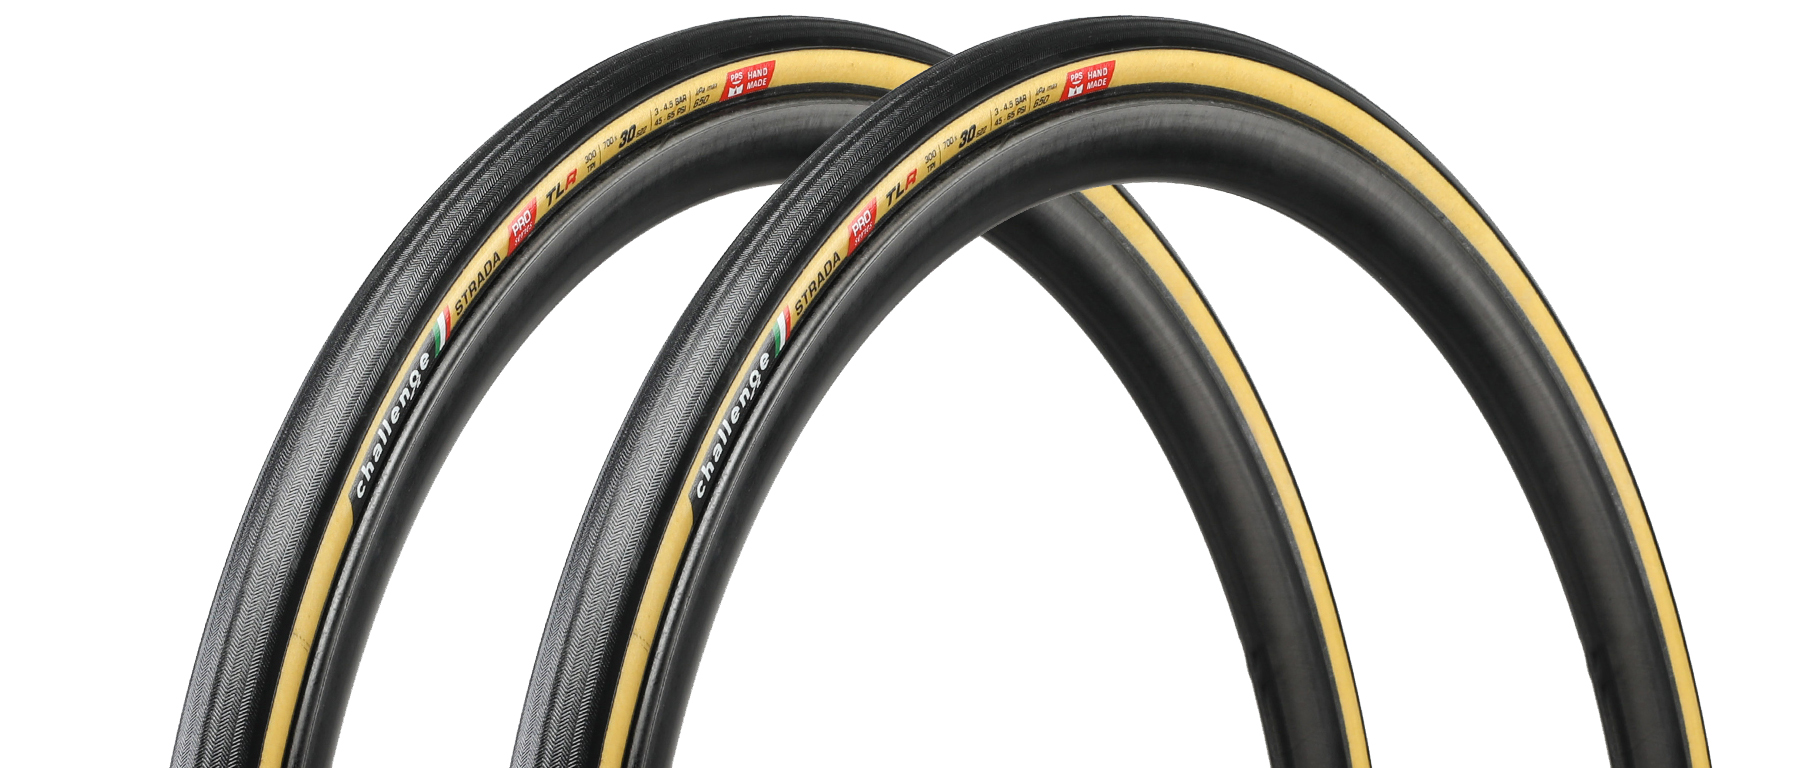 Challenge Strada Pro Series TLR Tire 2-Pack